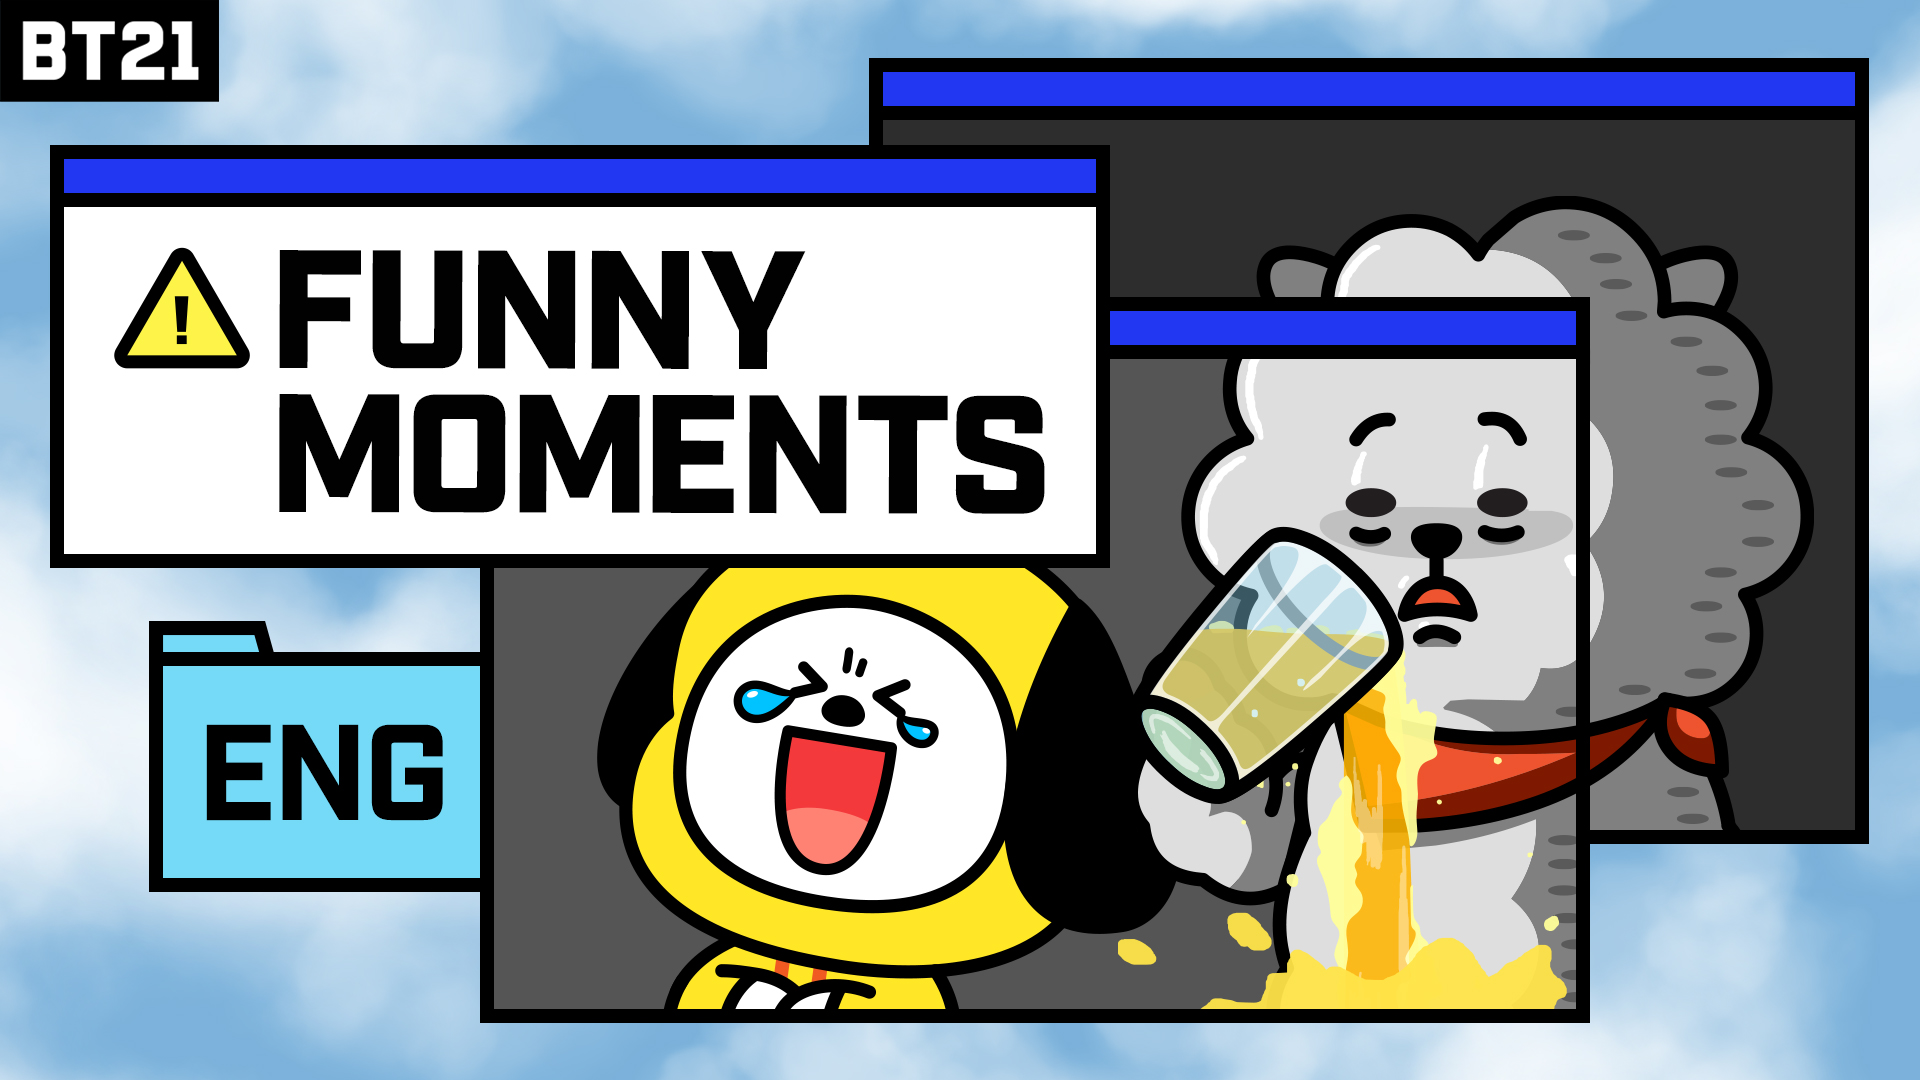 [BT21] FUNNY MOMENTS